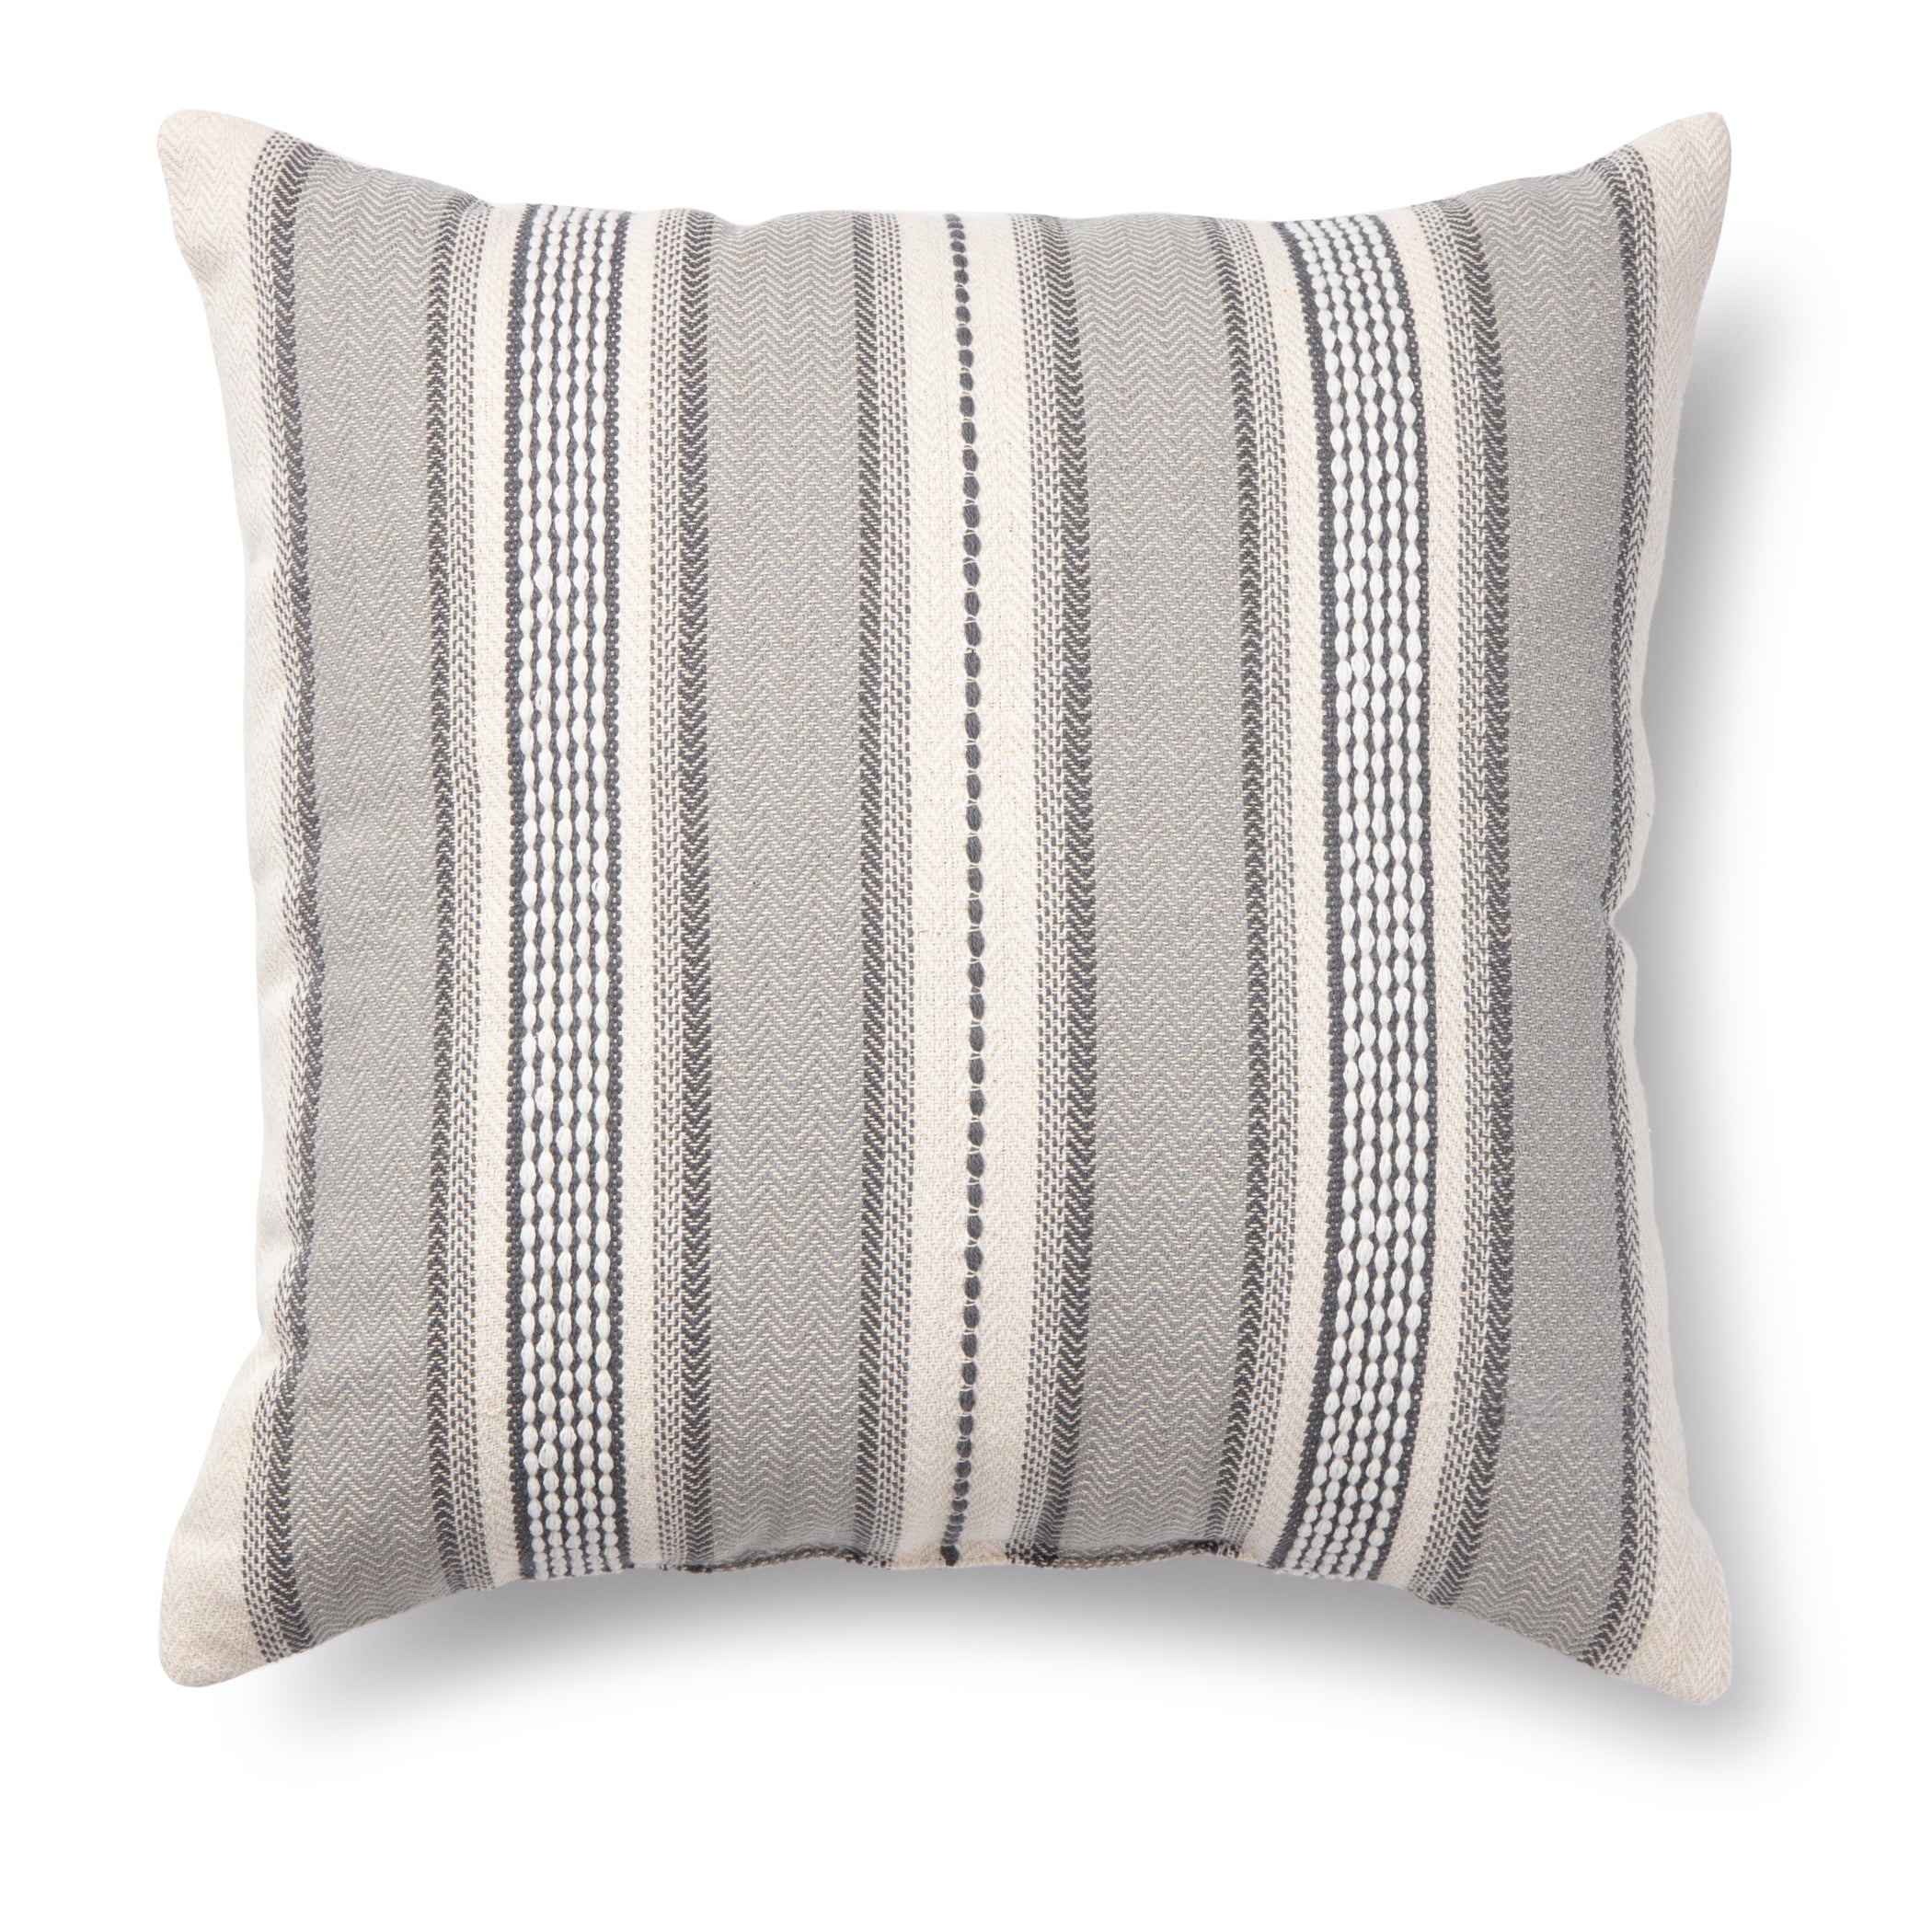 Sweet Jojo Designs Grey and White Chevron Decorative Accent Throw Pillow for Turquoise and Grey Zig Zag Collection 